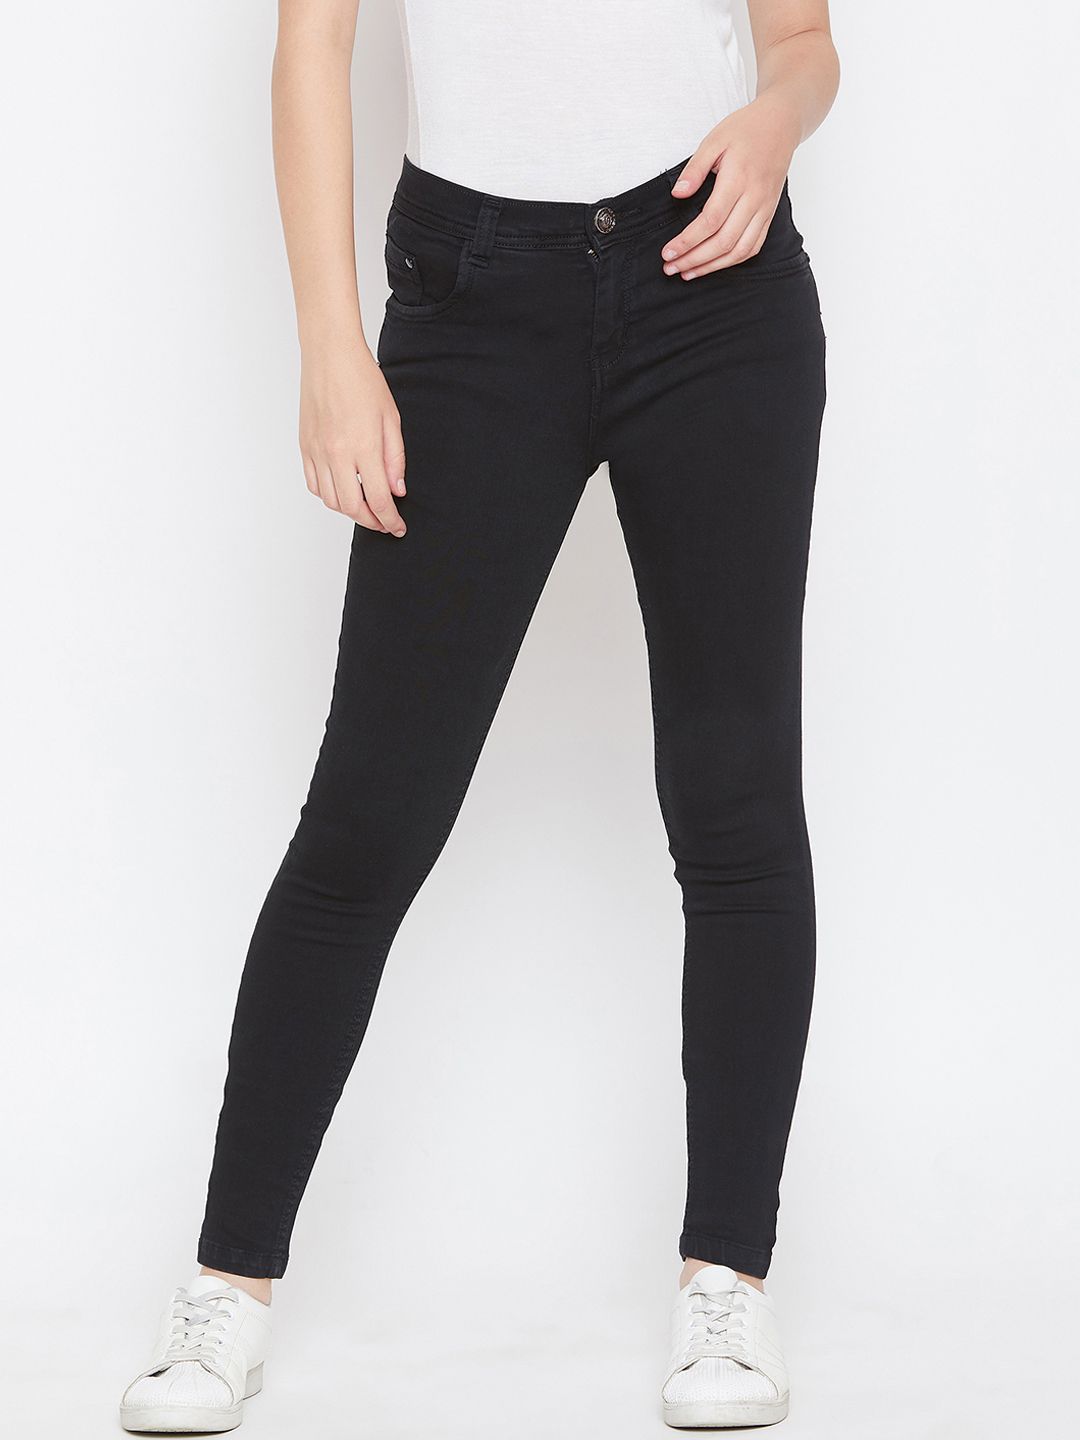 Nifty Women Black Slim Fit Mid-Rise Clean Look Stretchable Jeans Price in India